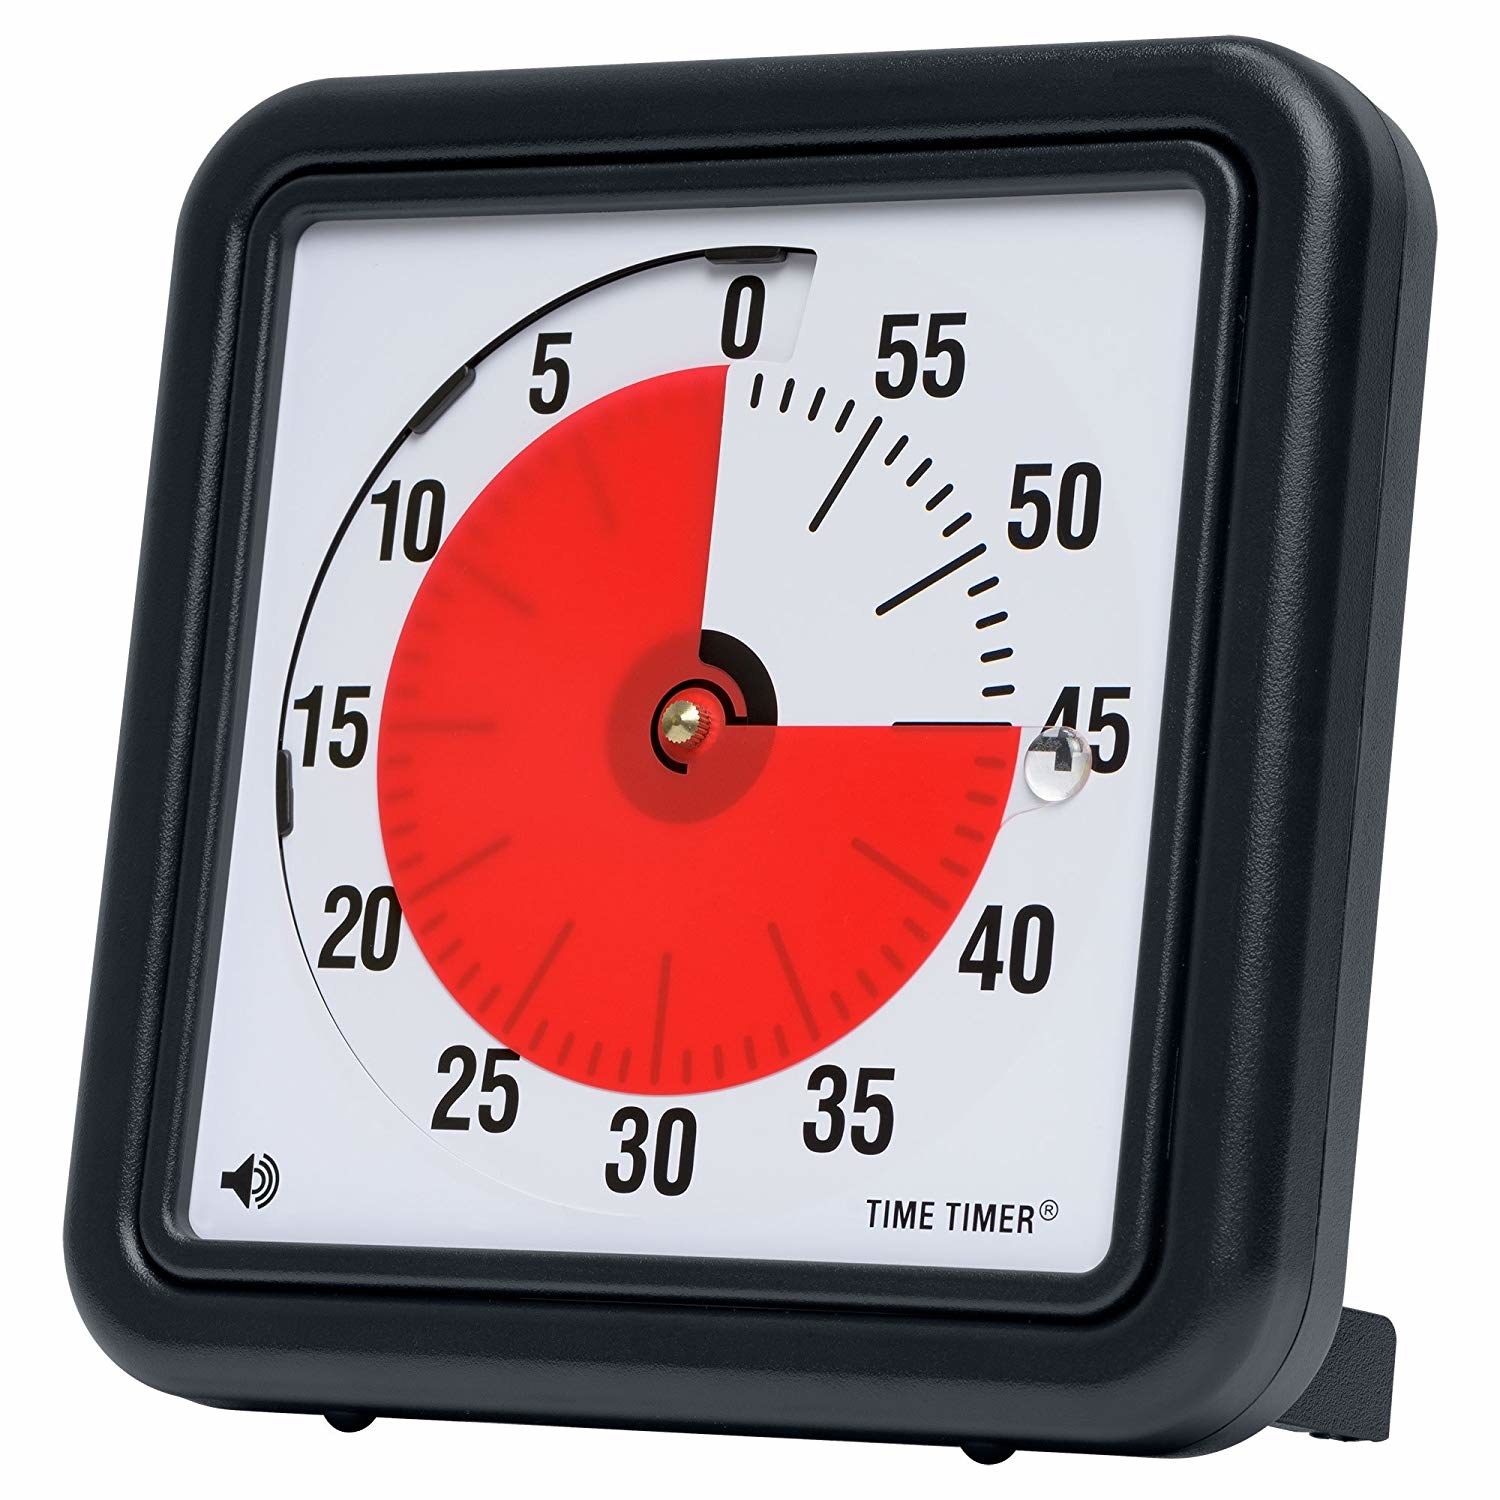 clock with red disc that disappears in a clockwise direction as time passes